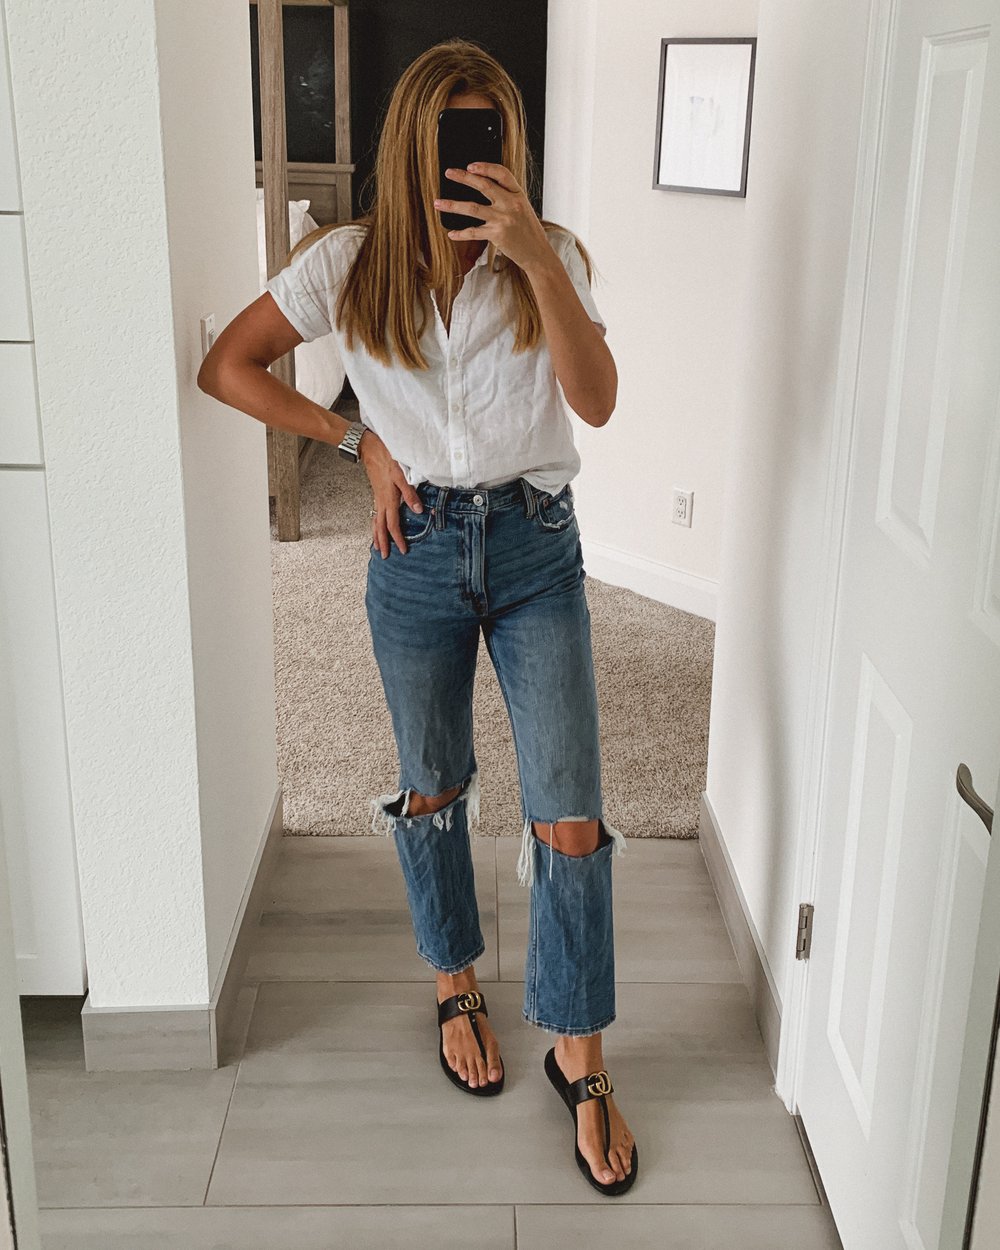  Jessica Ashley (hellojessicahley) styling Gucci Sandal Outfit with Abercrombie High Rise denim, and Banana Republic Linen button up | outfit inspiration, Gucci Marmont Sandal Outfit 